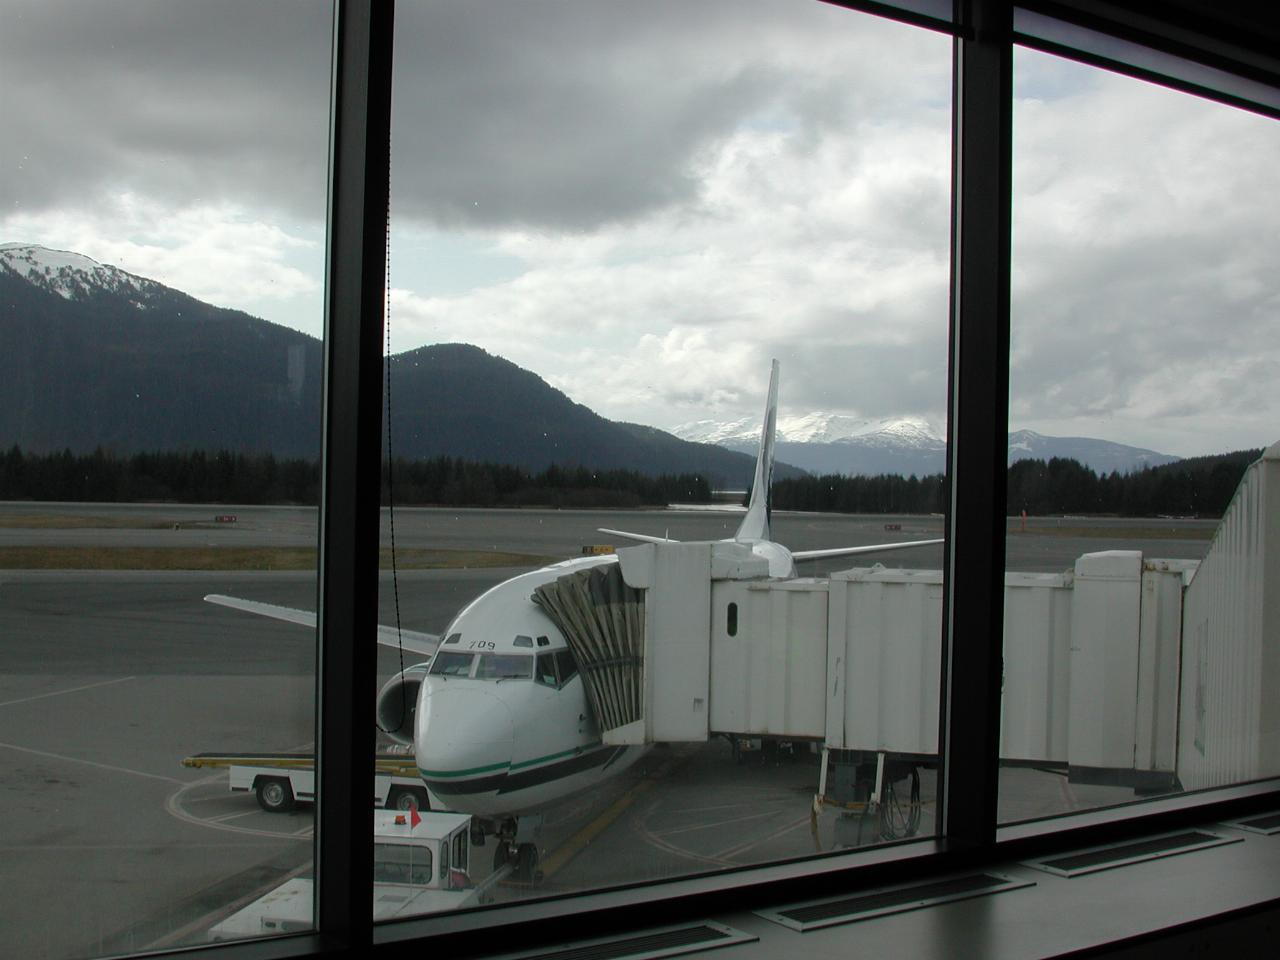 Our plane for Anchorage waiting at Juneau Airport